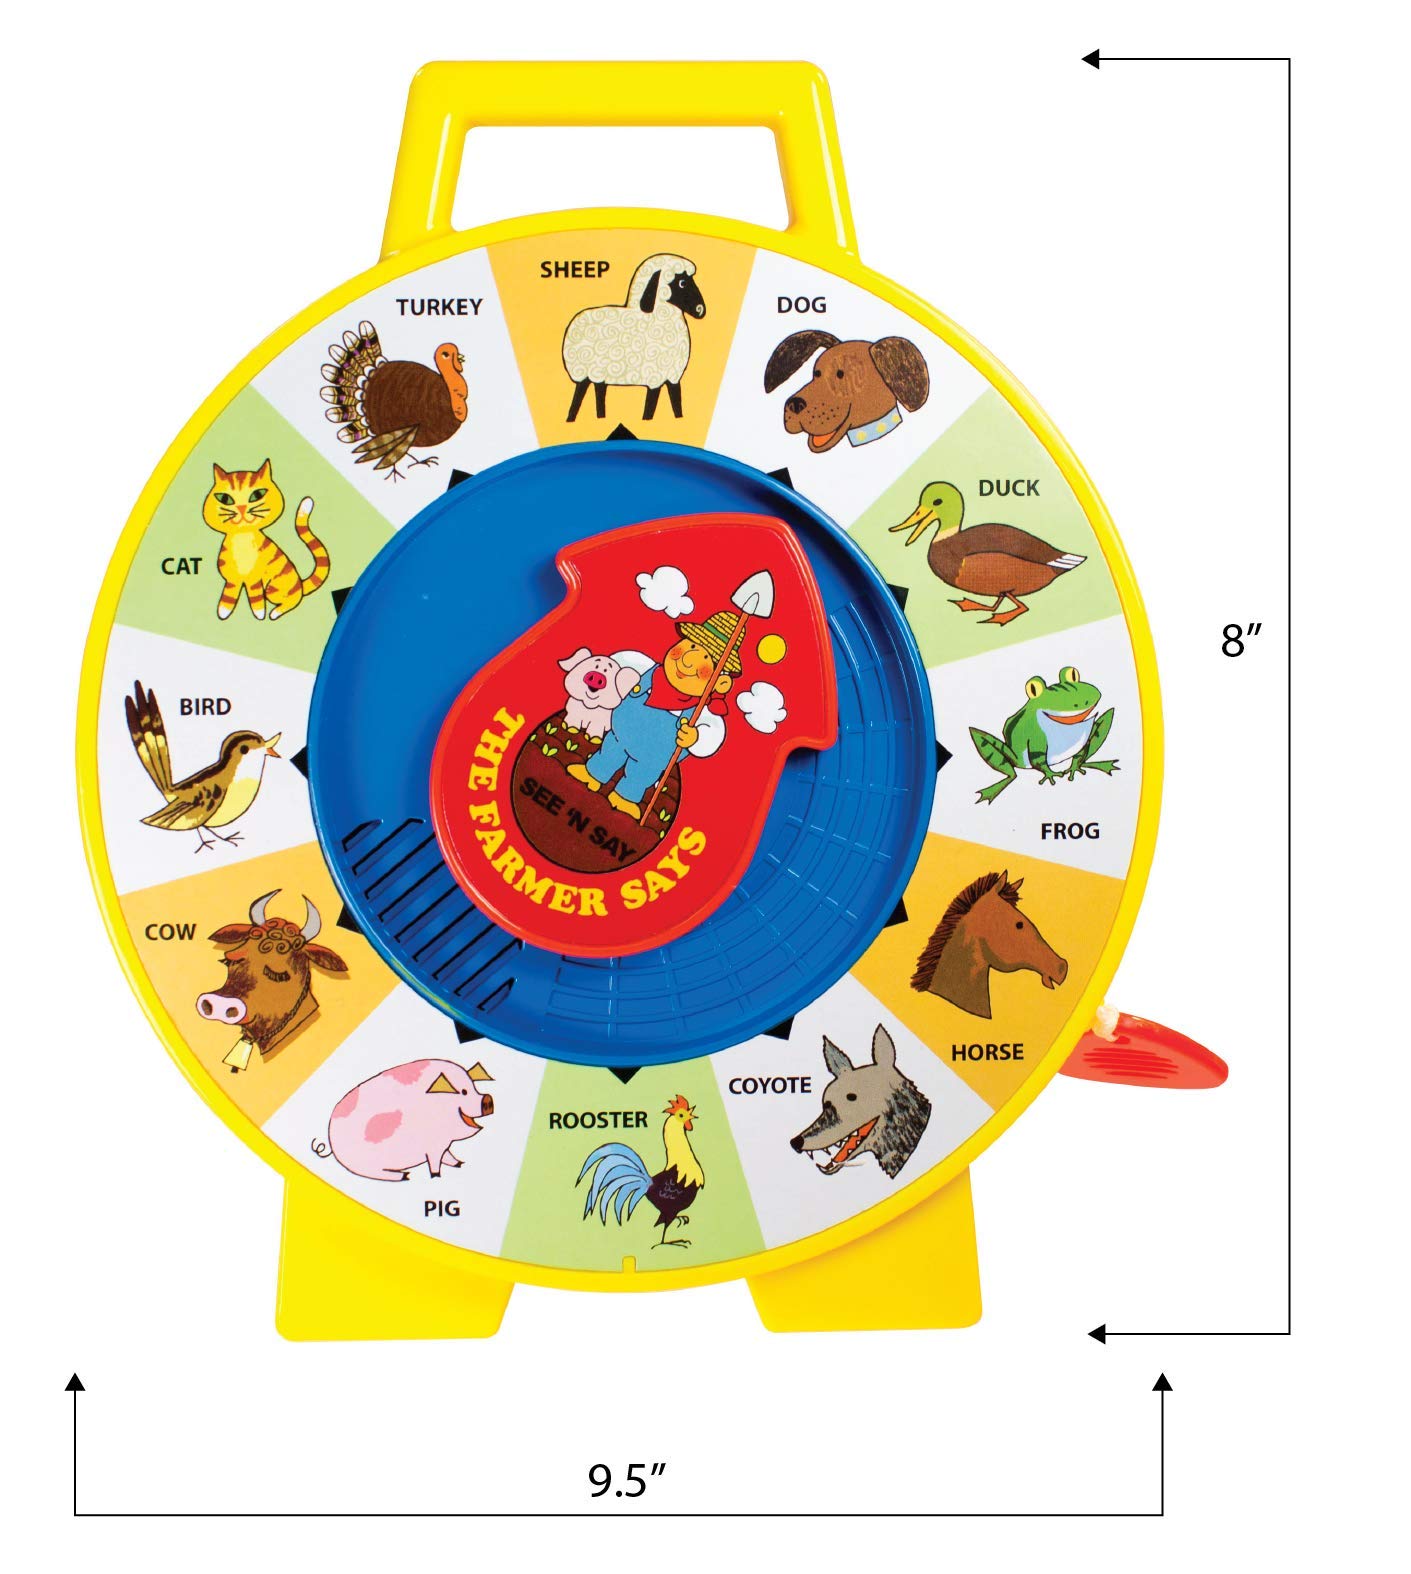 Basic Fun Fisher Price Classic Toys - The Farmer Says See 'N Say - Great Pre-School Gift for Girls and Boys, multi